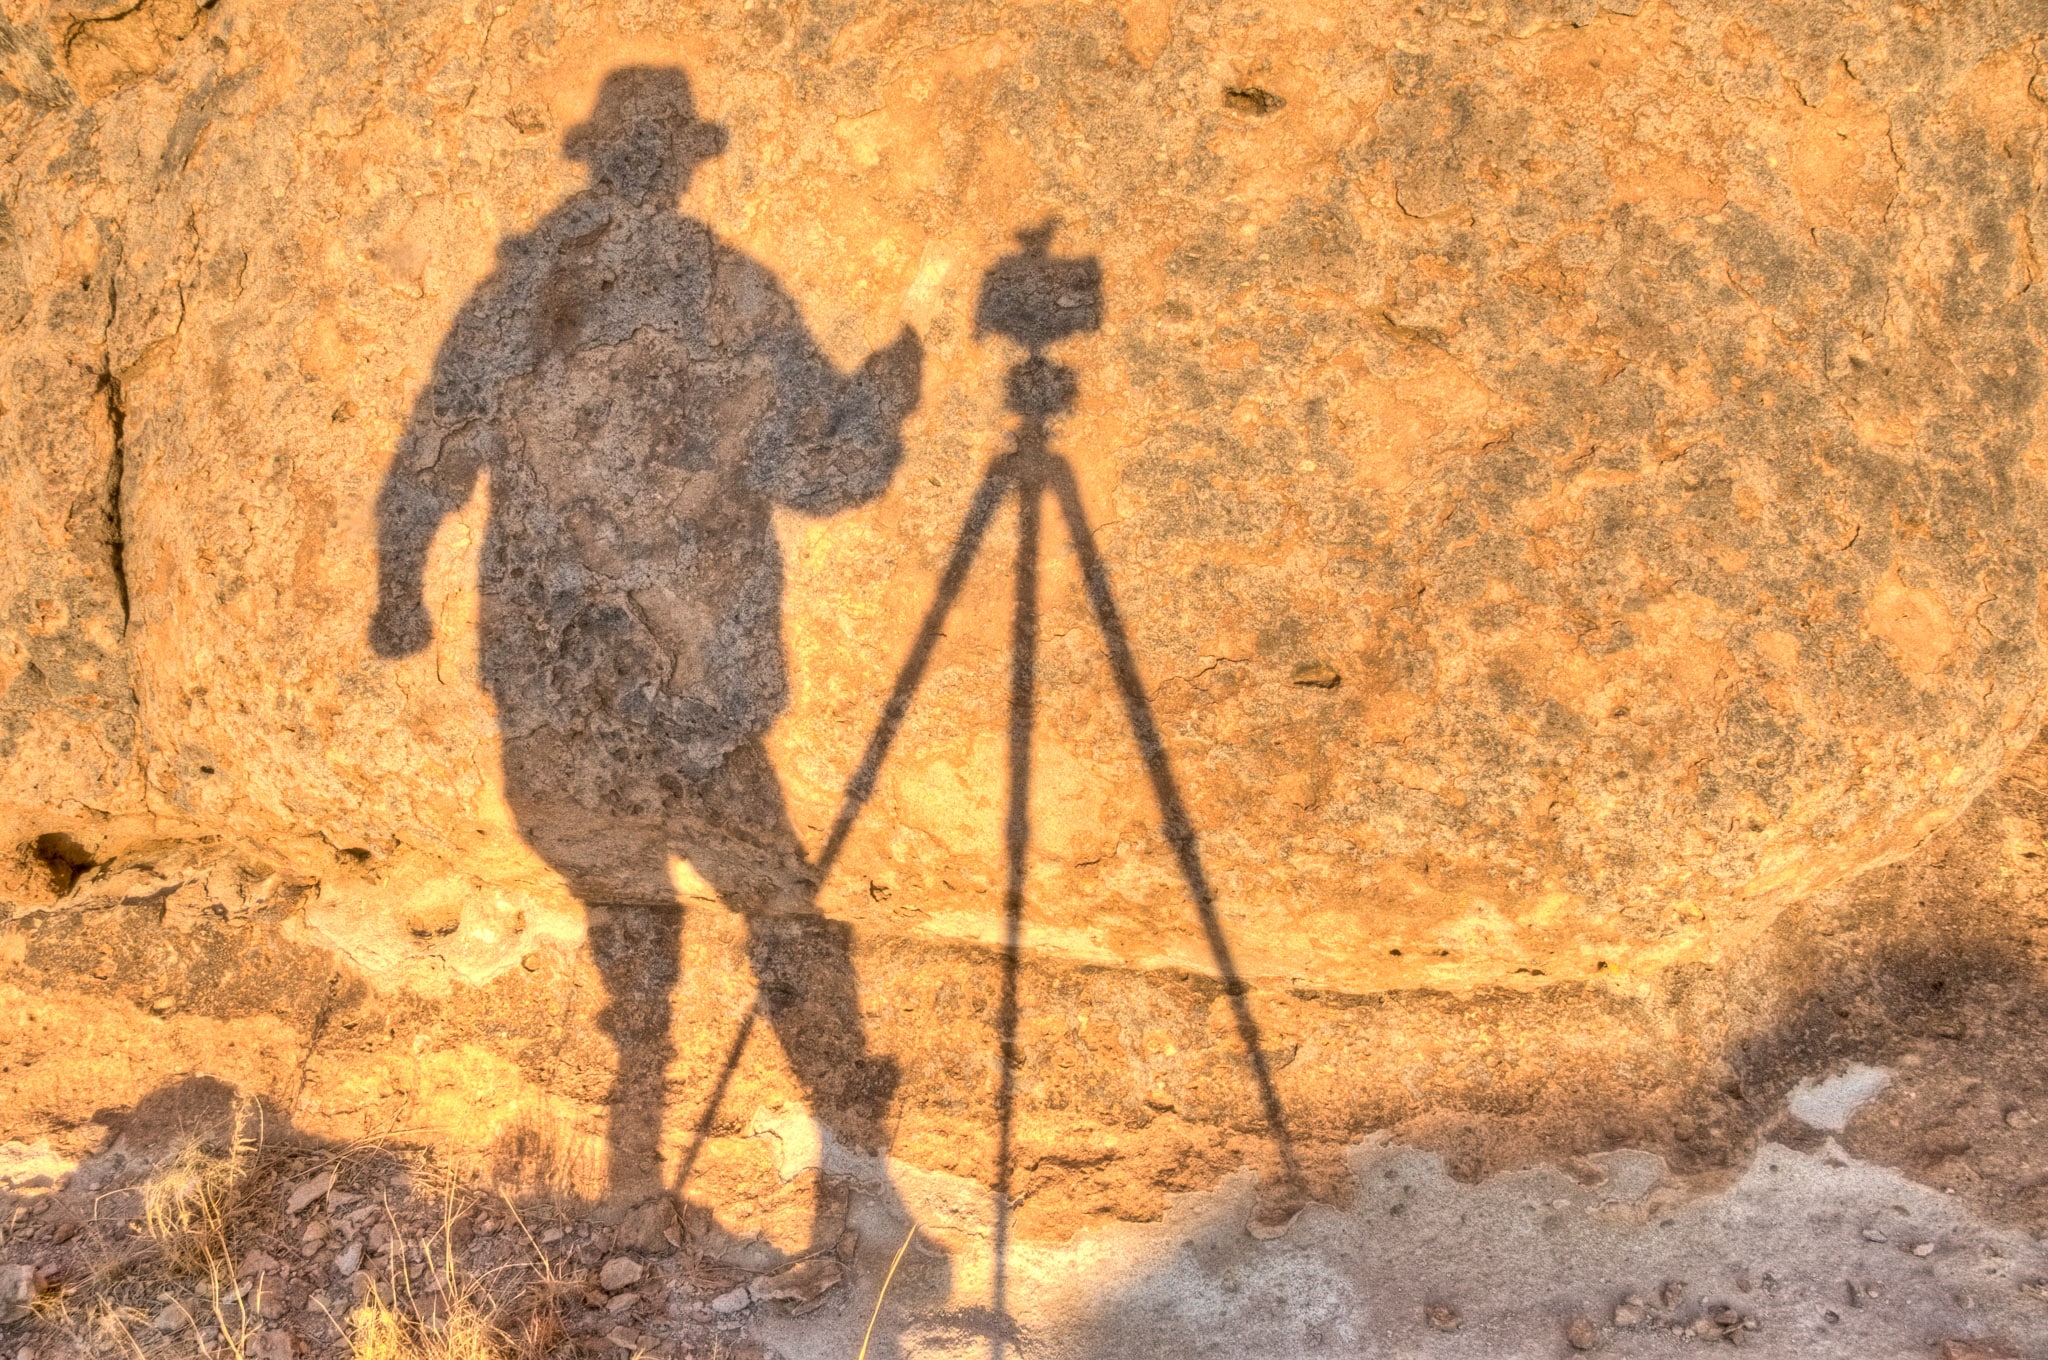 Sunrise shadow of the photographer, camera, and tripod on rock in City of Rocks State Park in New Mexico.